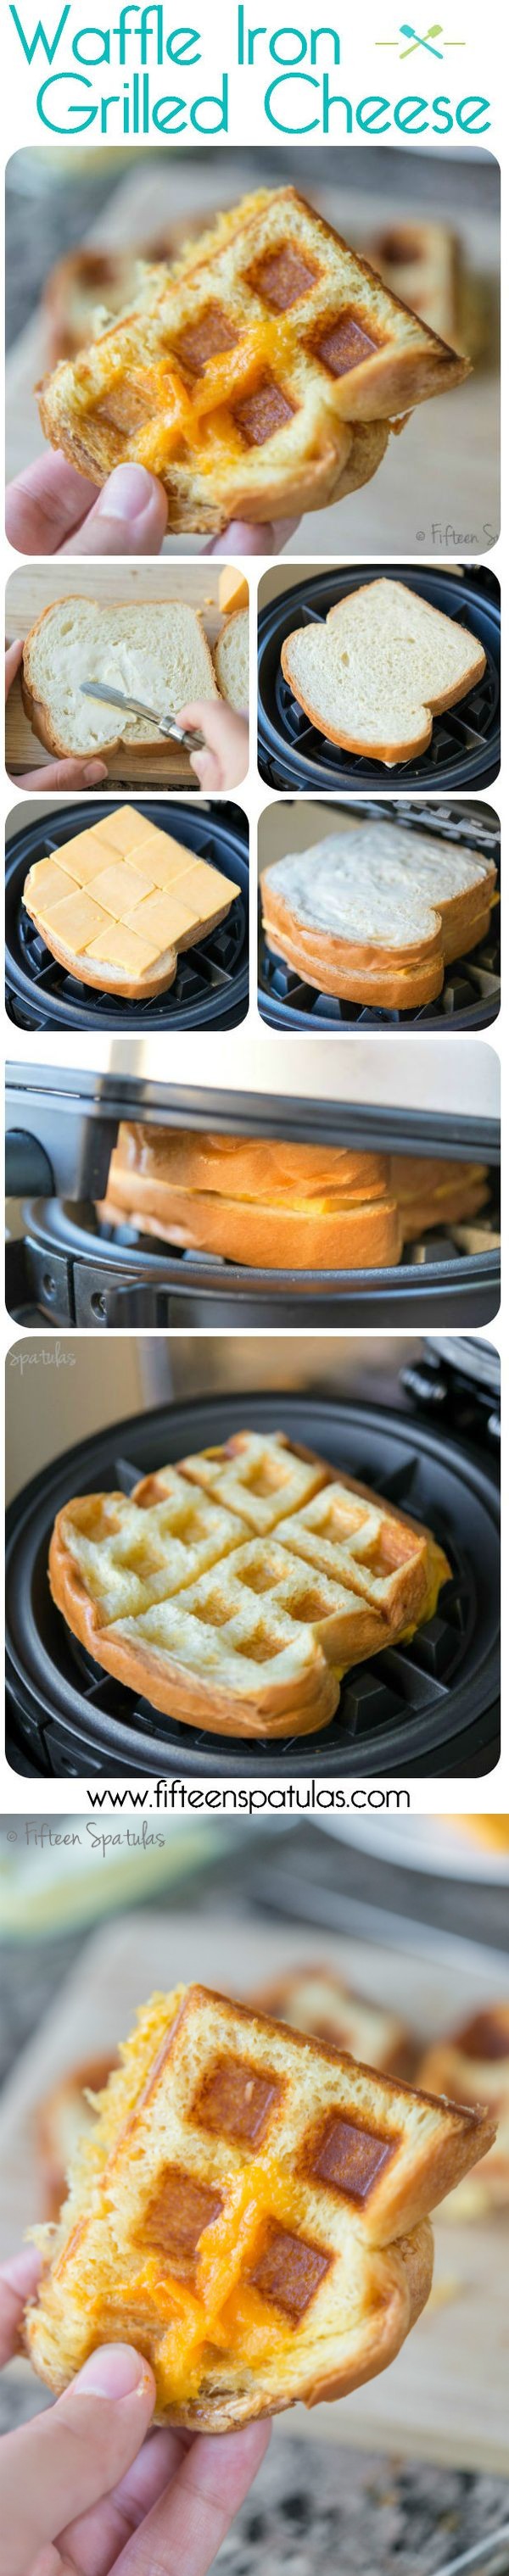 Waffle Baker Grilled Cheese Sandwich